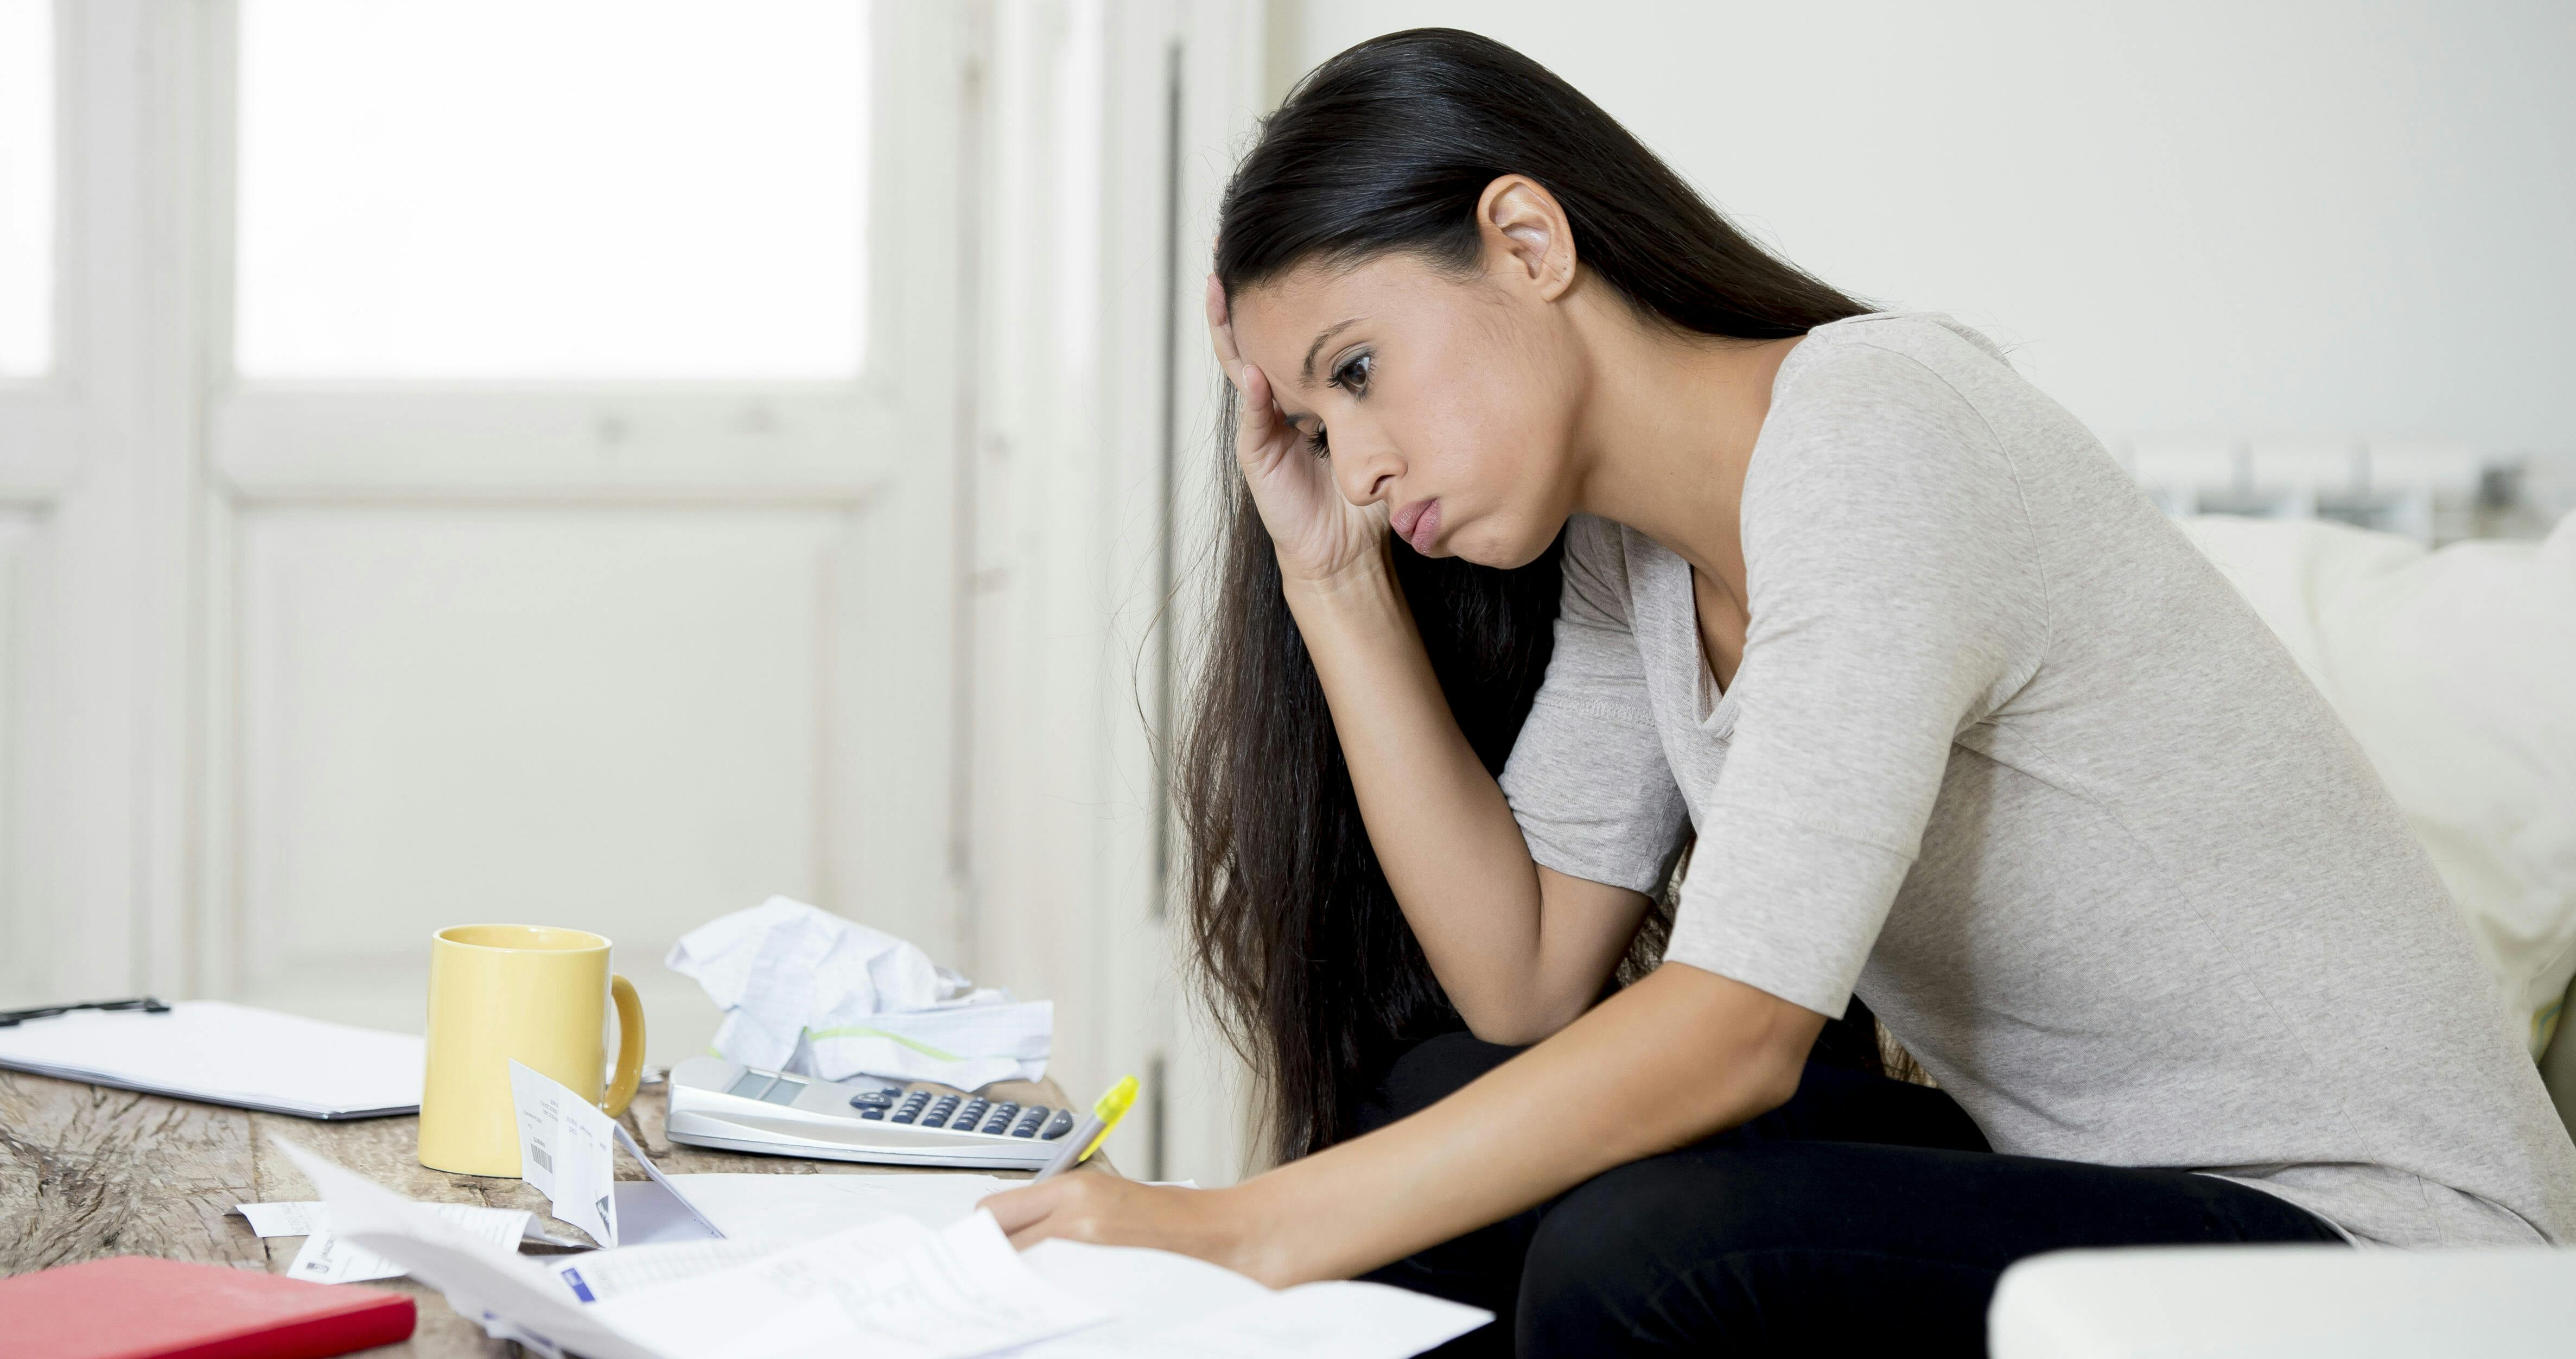 woman taxes paperwork frustrated tax bill